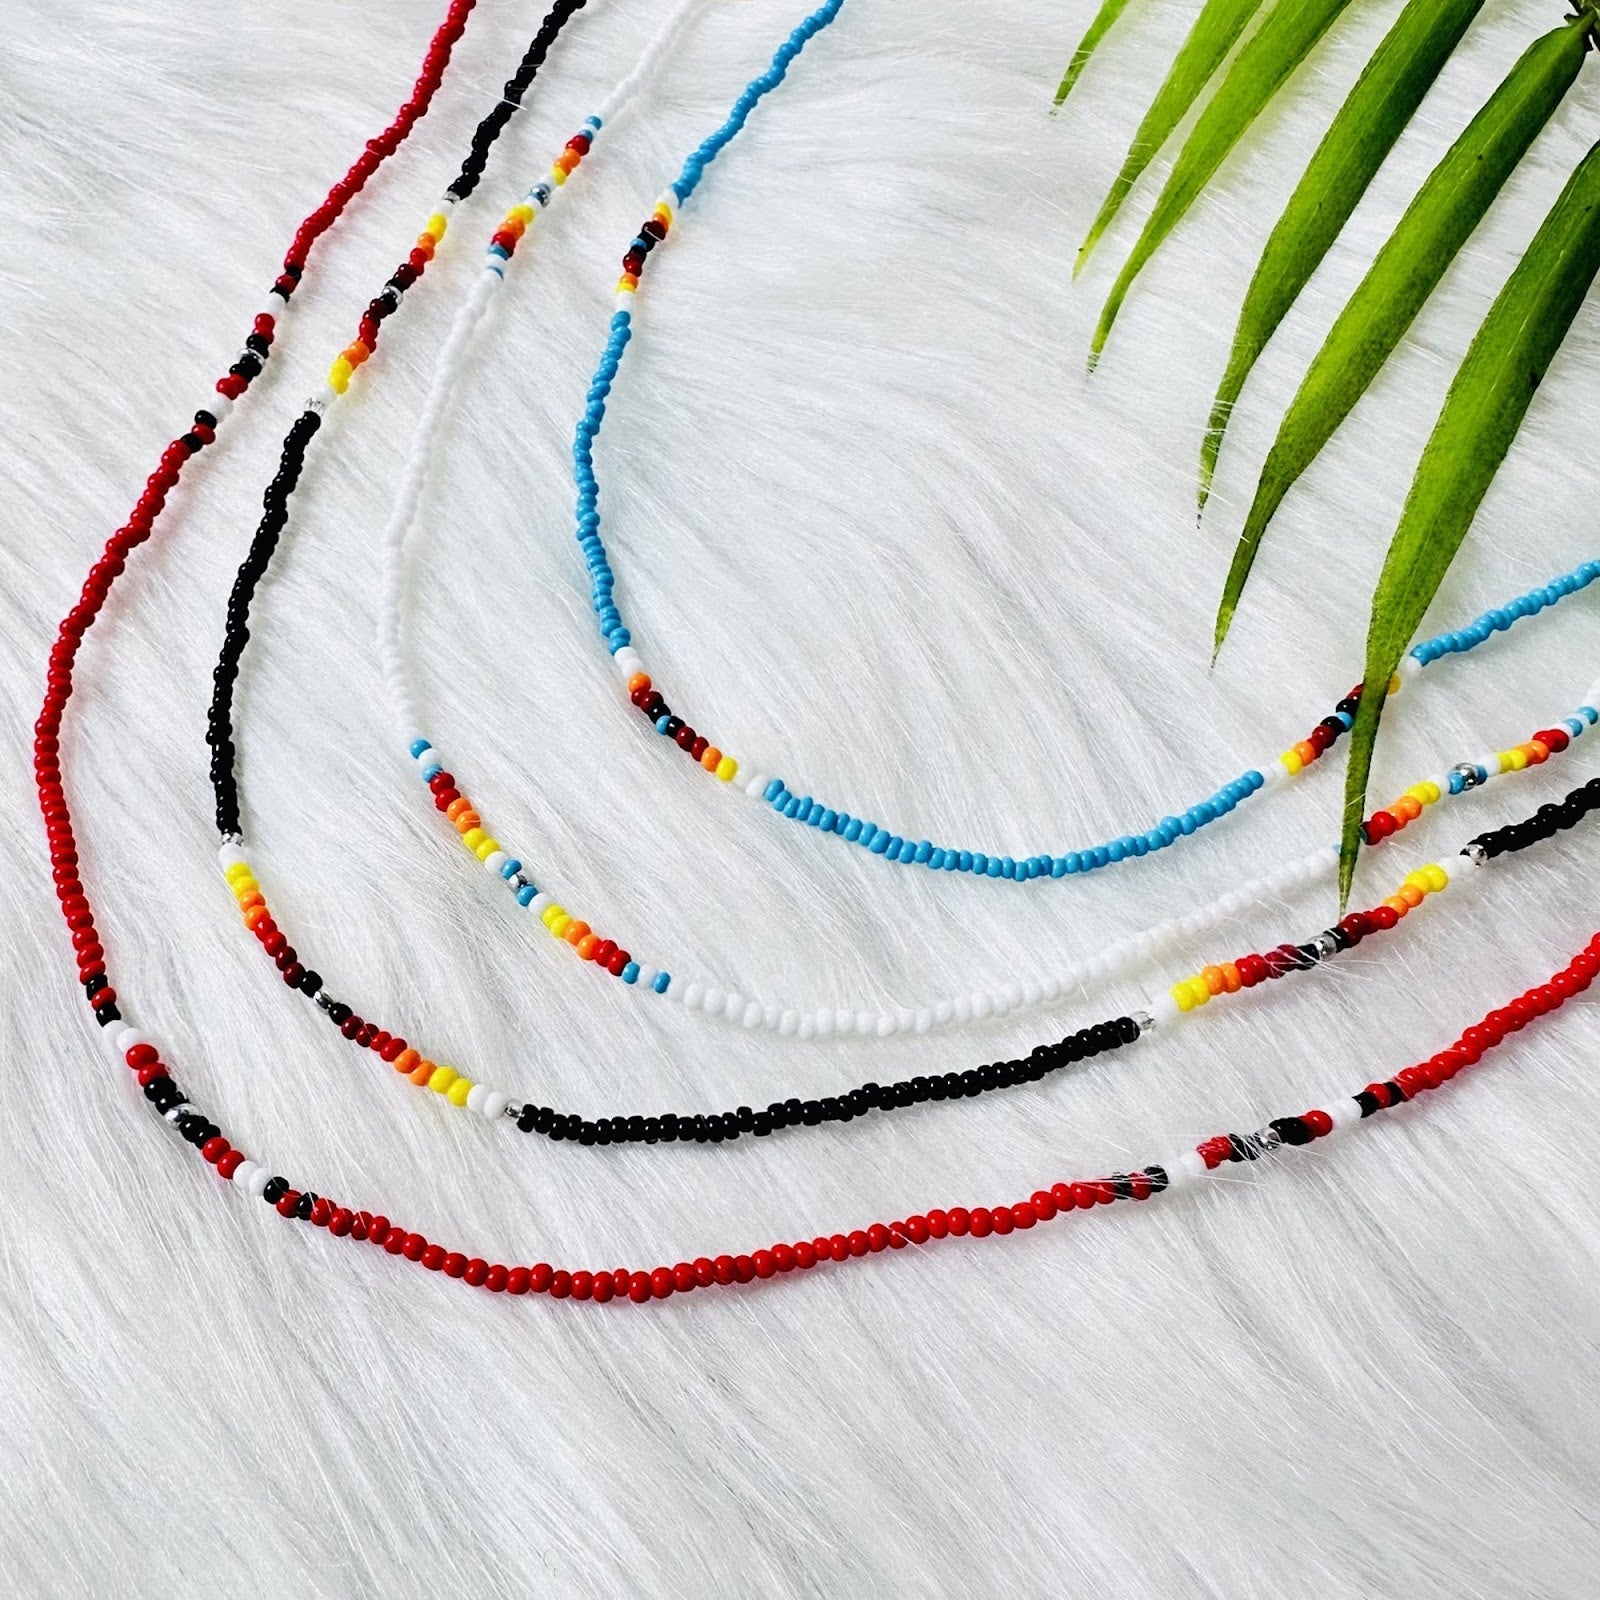 Full Color Handmade Beaded Necklace Unisex With Native American Style